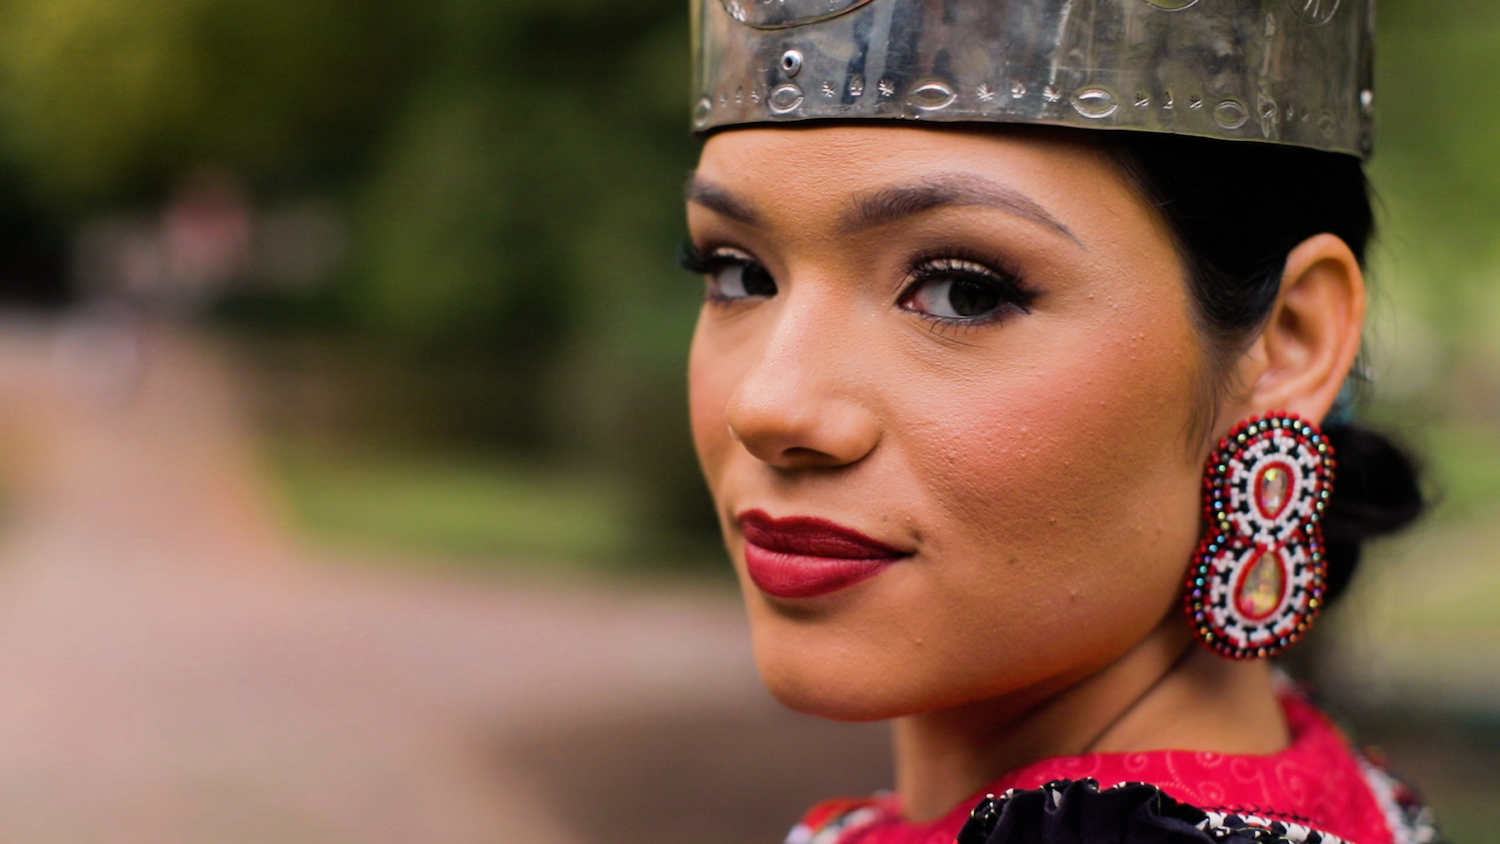 Ashtyn Thomas, Miss Lumbee 2023, looks over her shoulder at the camera while wearing the Miss Lumbee crown.